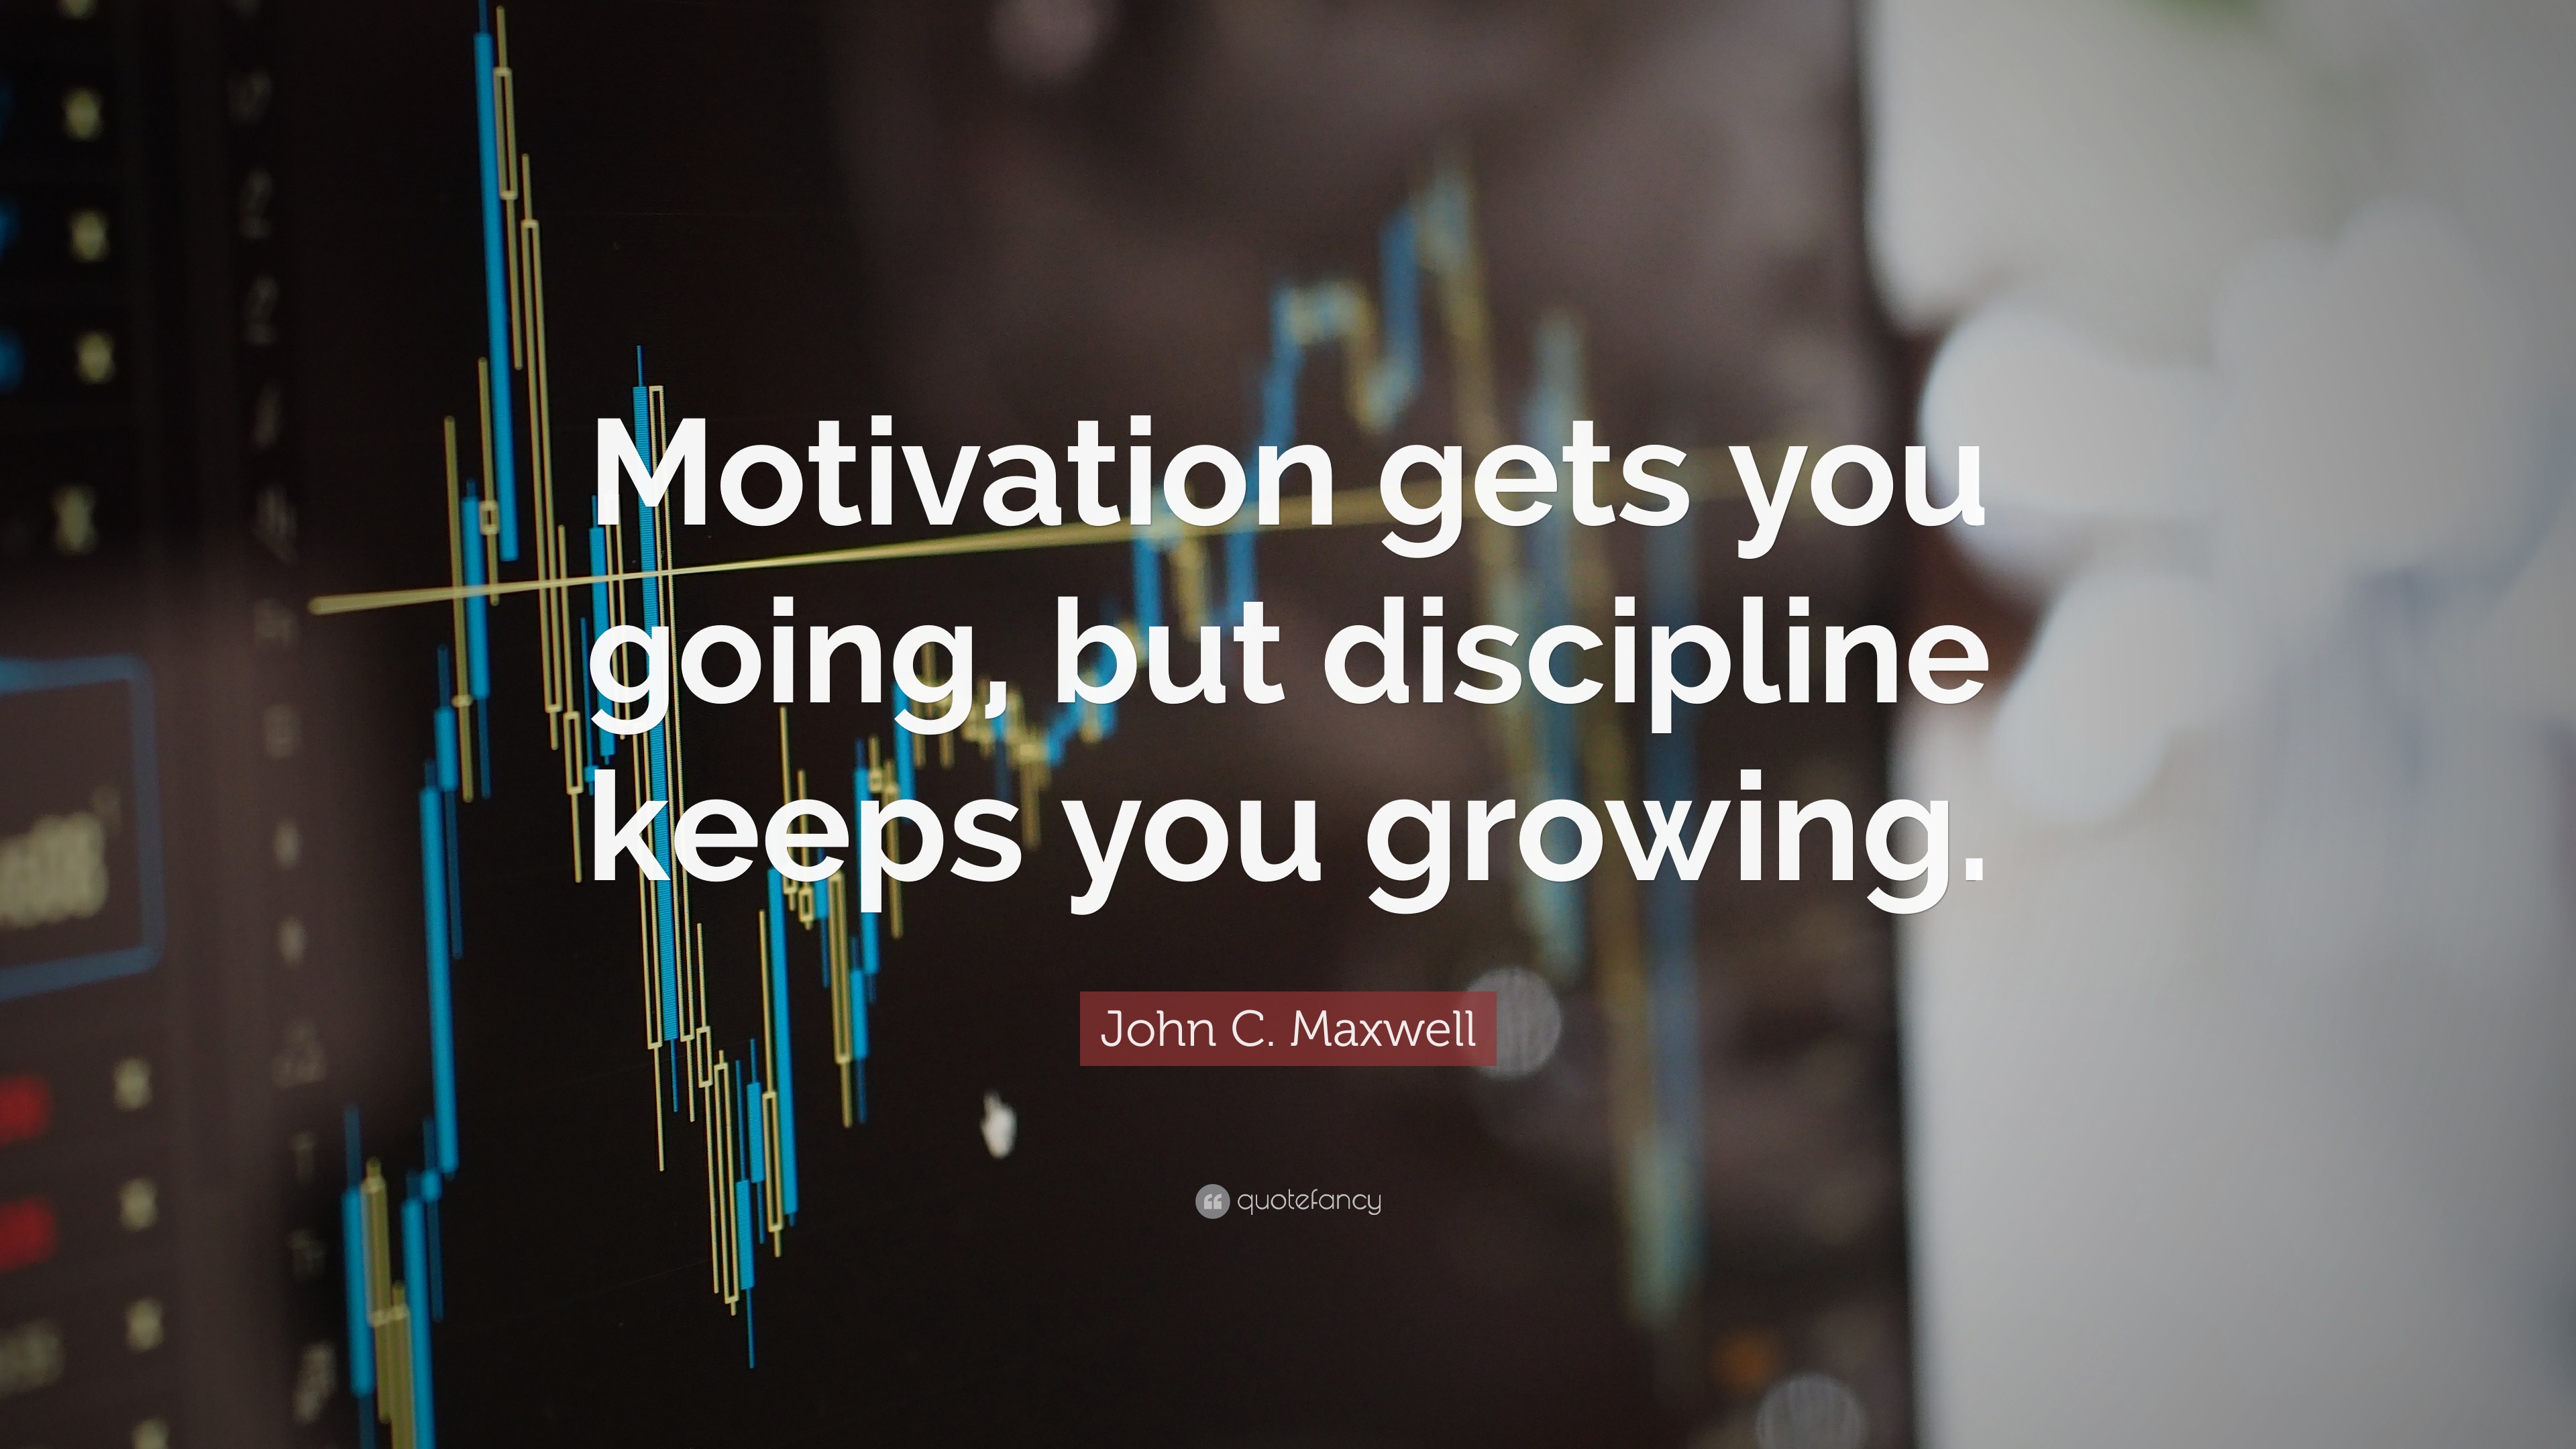 John C. Maxwell Quote: “Motivation gets you going, but discipline keeps